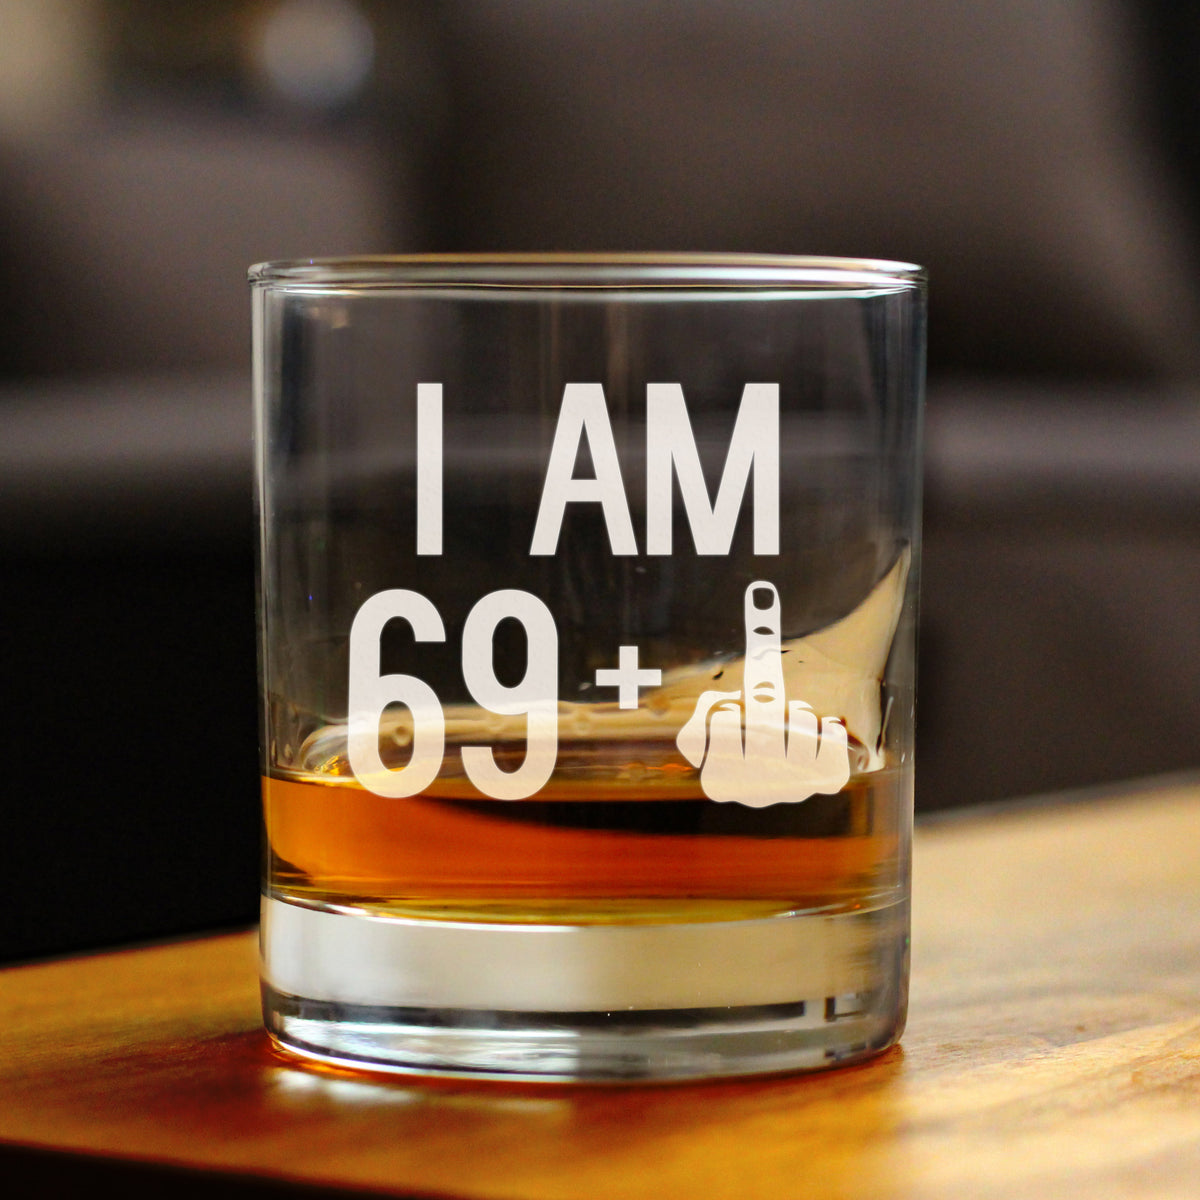 69 + 1 Middle Finger - Funny 70th Birthday Whiskey Rocks Glass Gifts for Men &amp; Women Turning 70 - Fun Whisky Drinking Tumbler